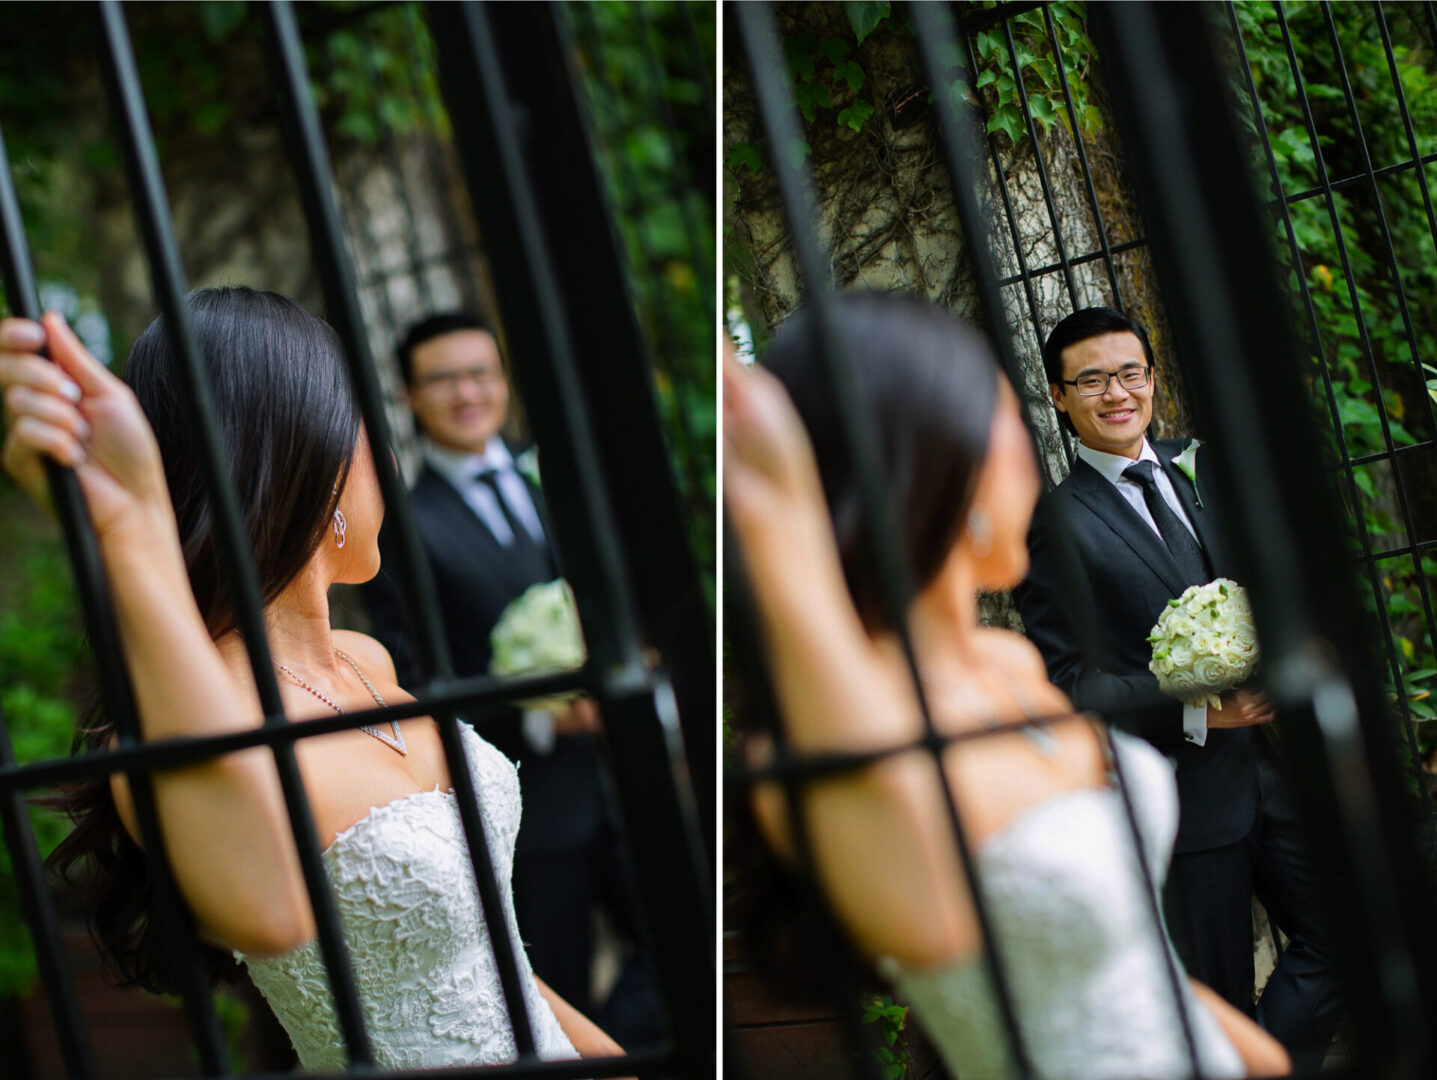 Two pictures of the bride and groom focusing